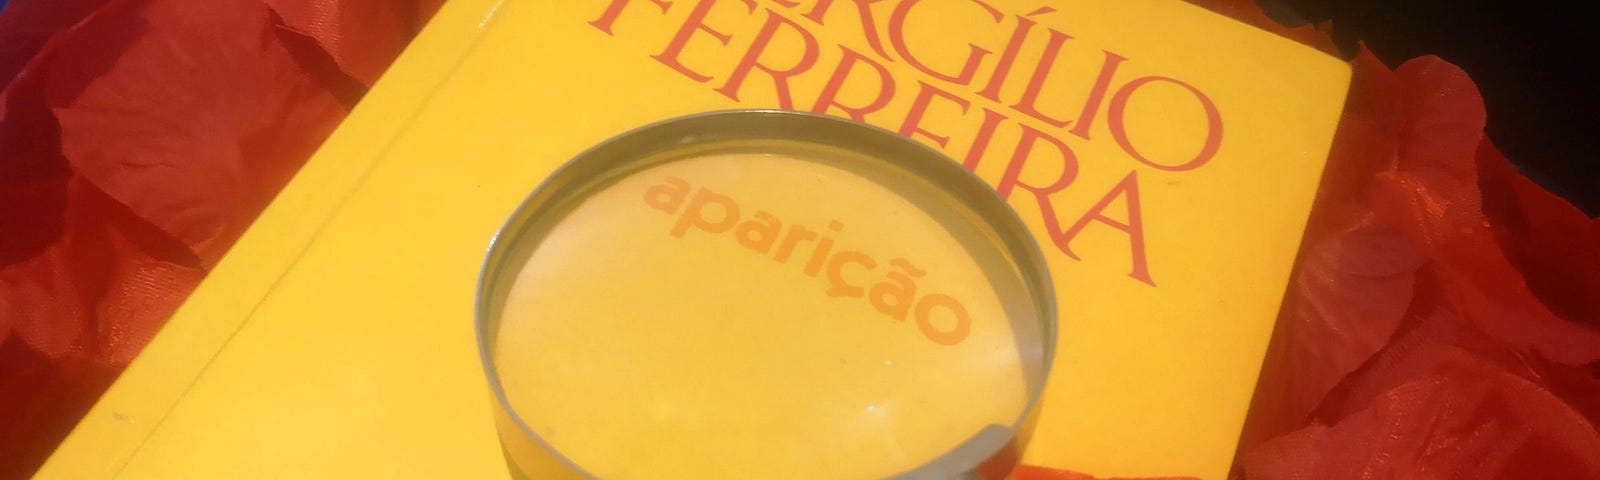 Copy of the novel “Aparição” by vergílio Ferreira laying on red rose petals and with a magnifying lens on top.